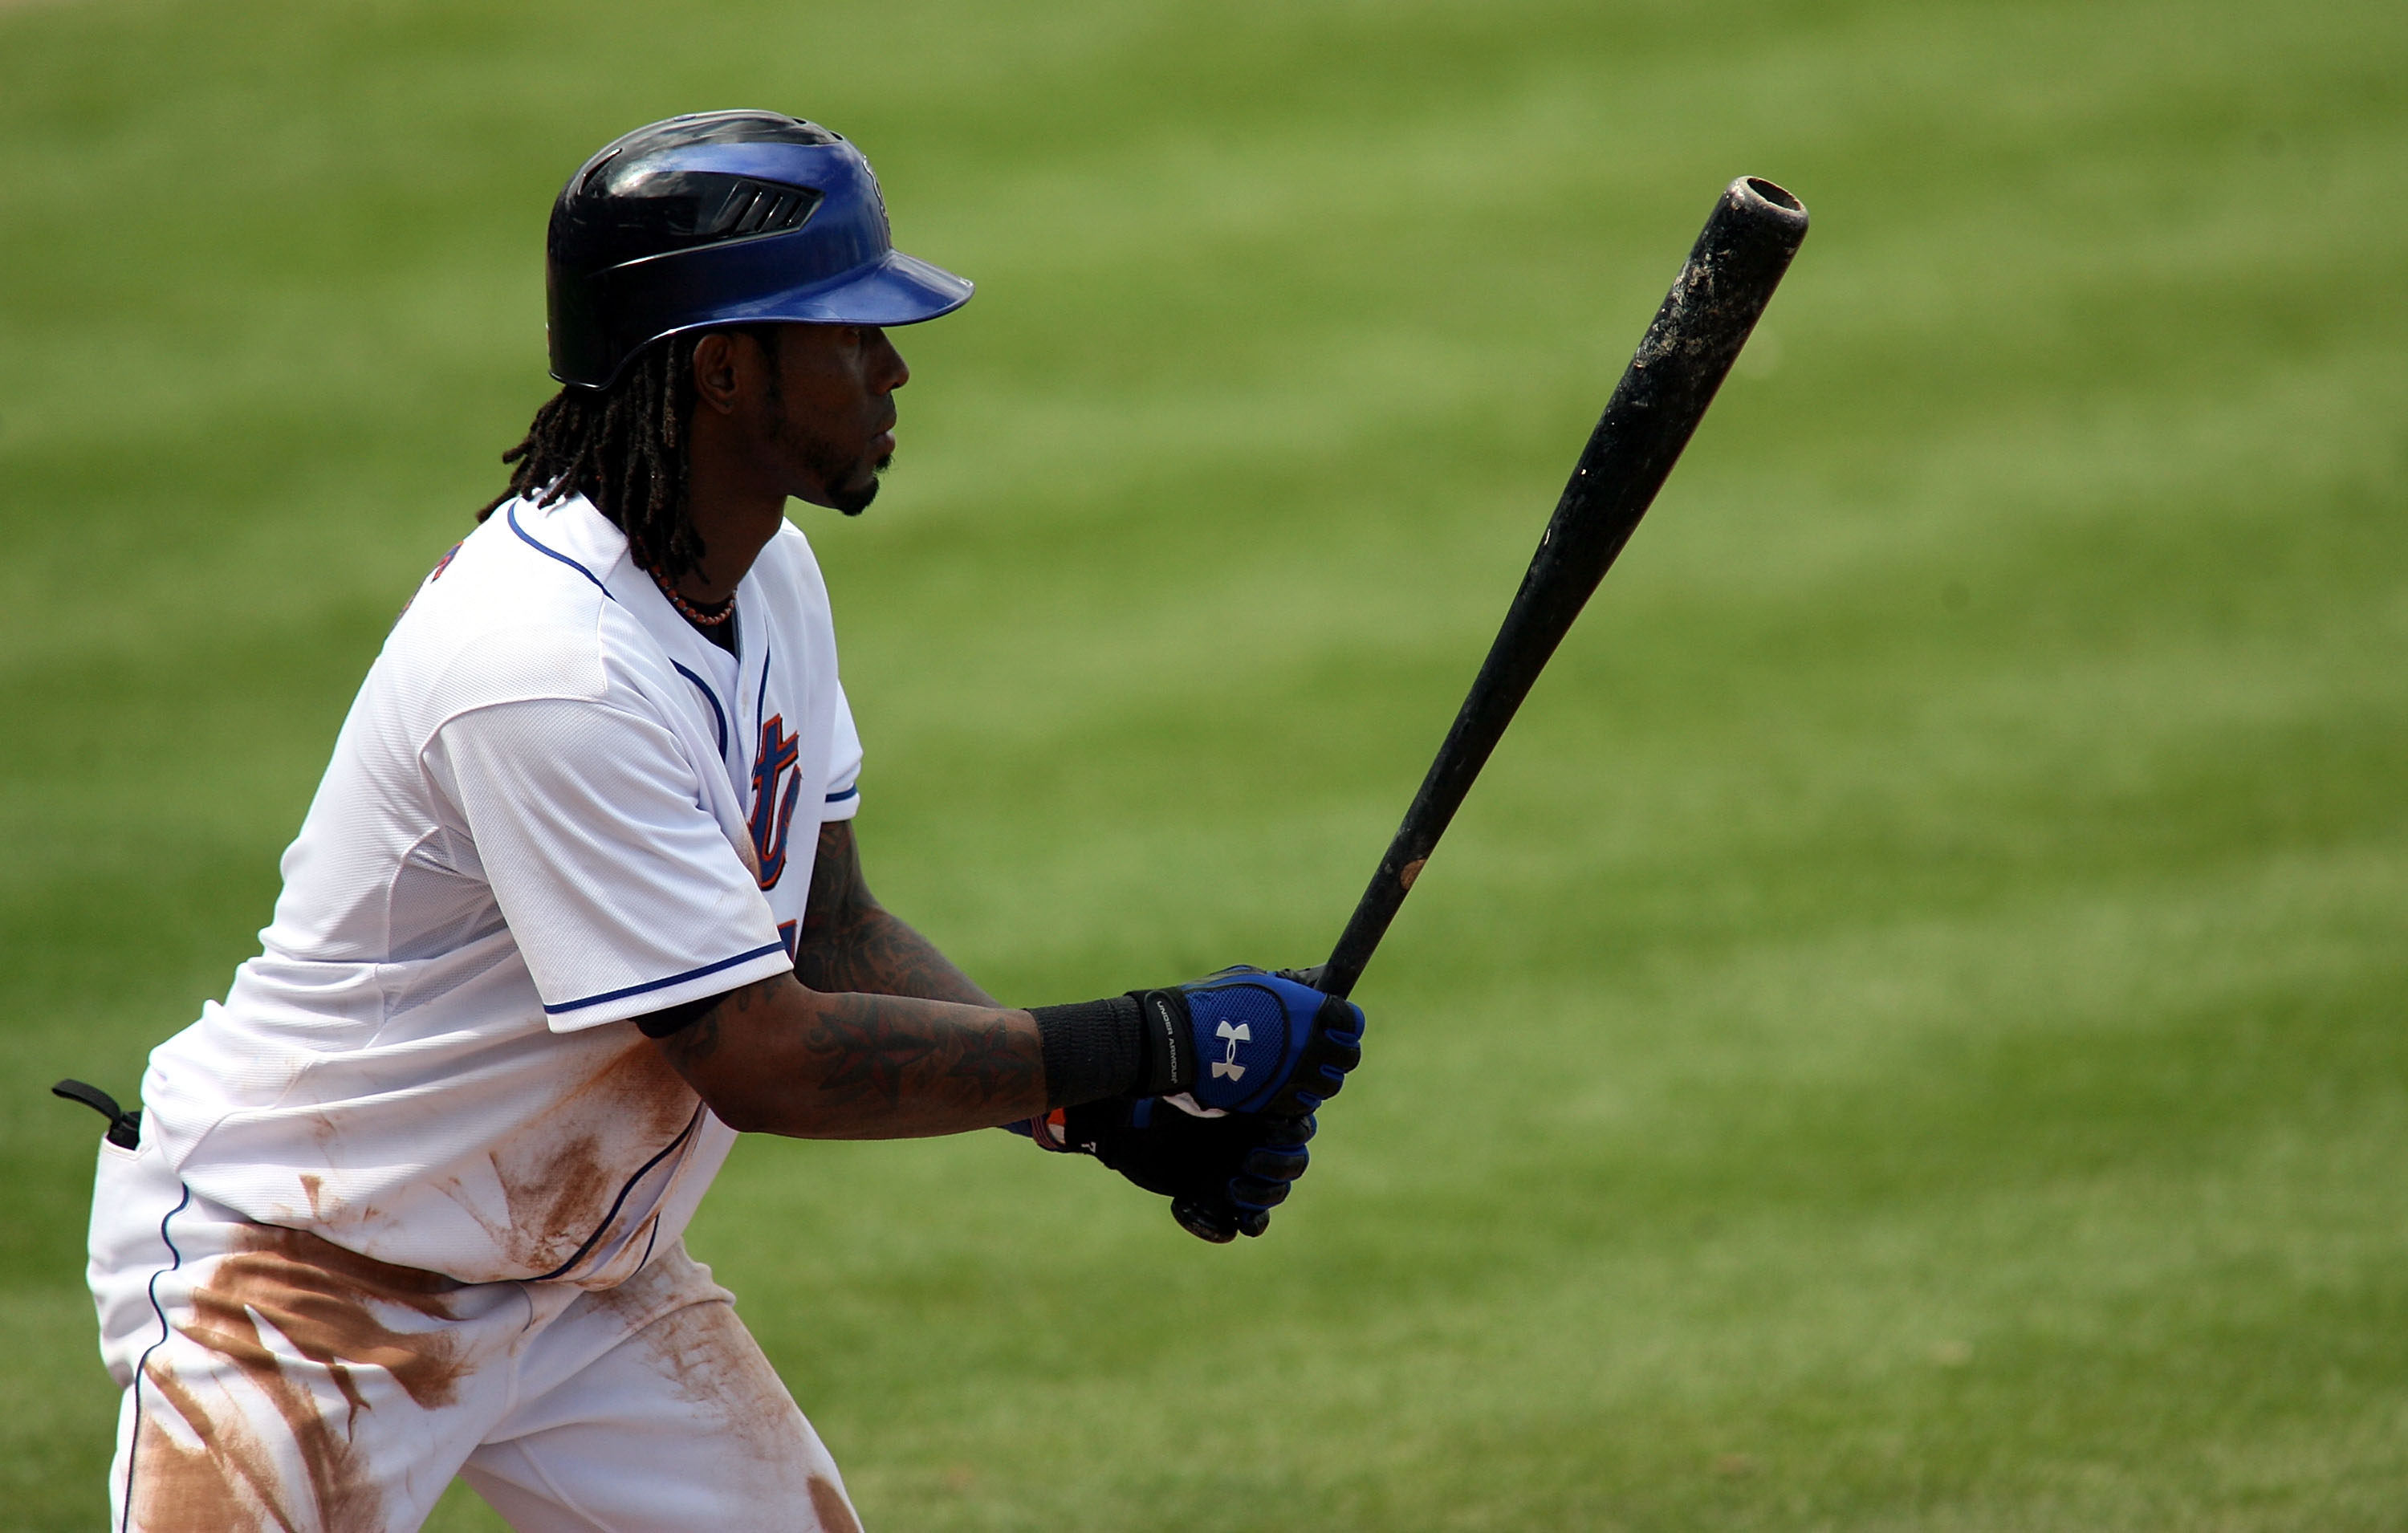 Former NY Mets shortstop Jose Reyes is chasing a new score with